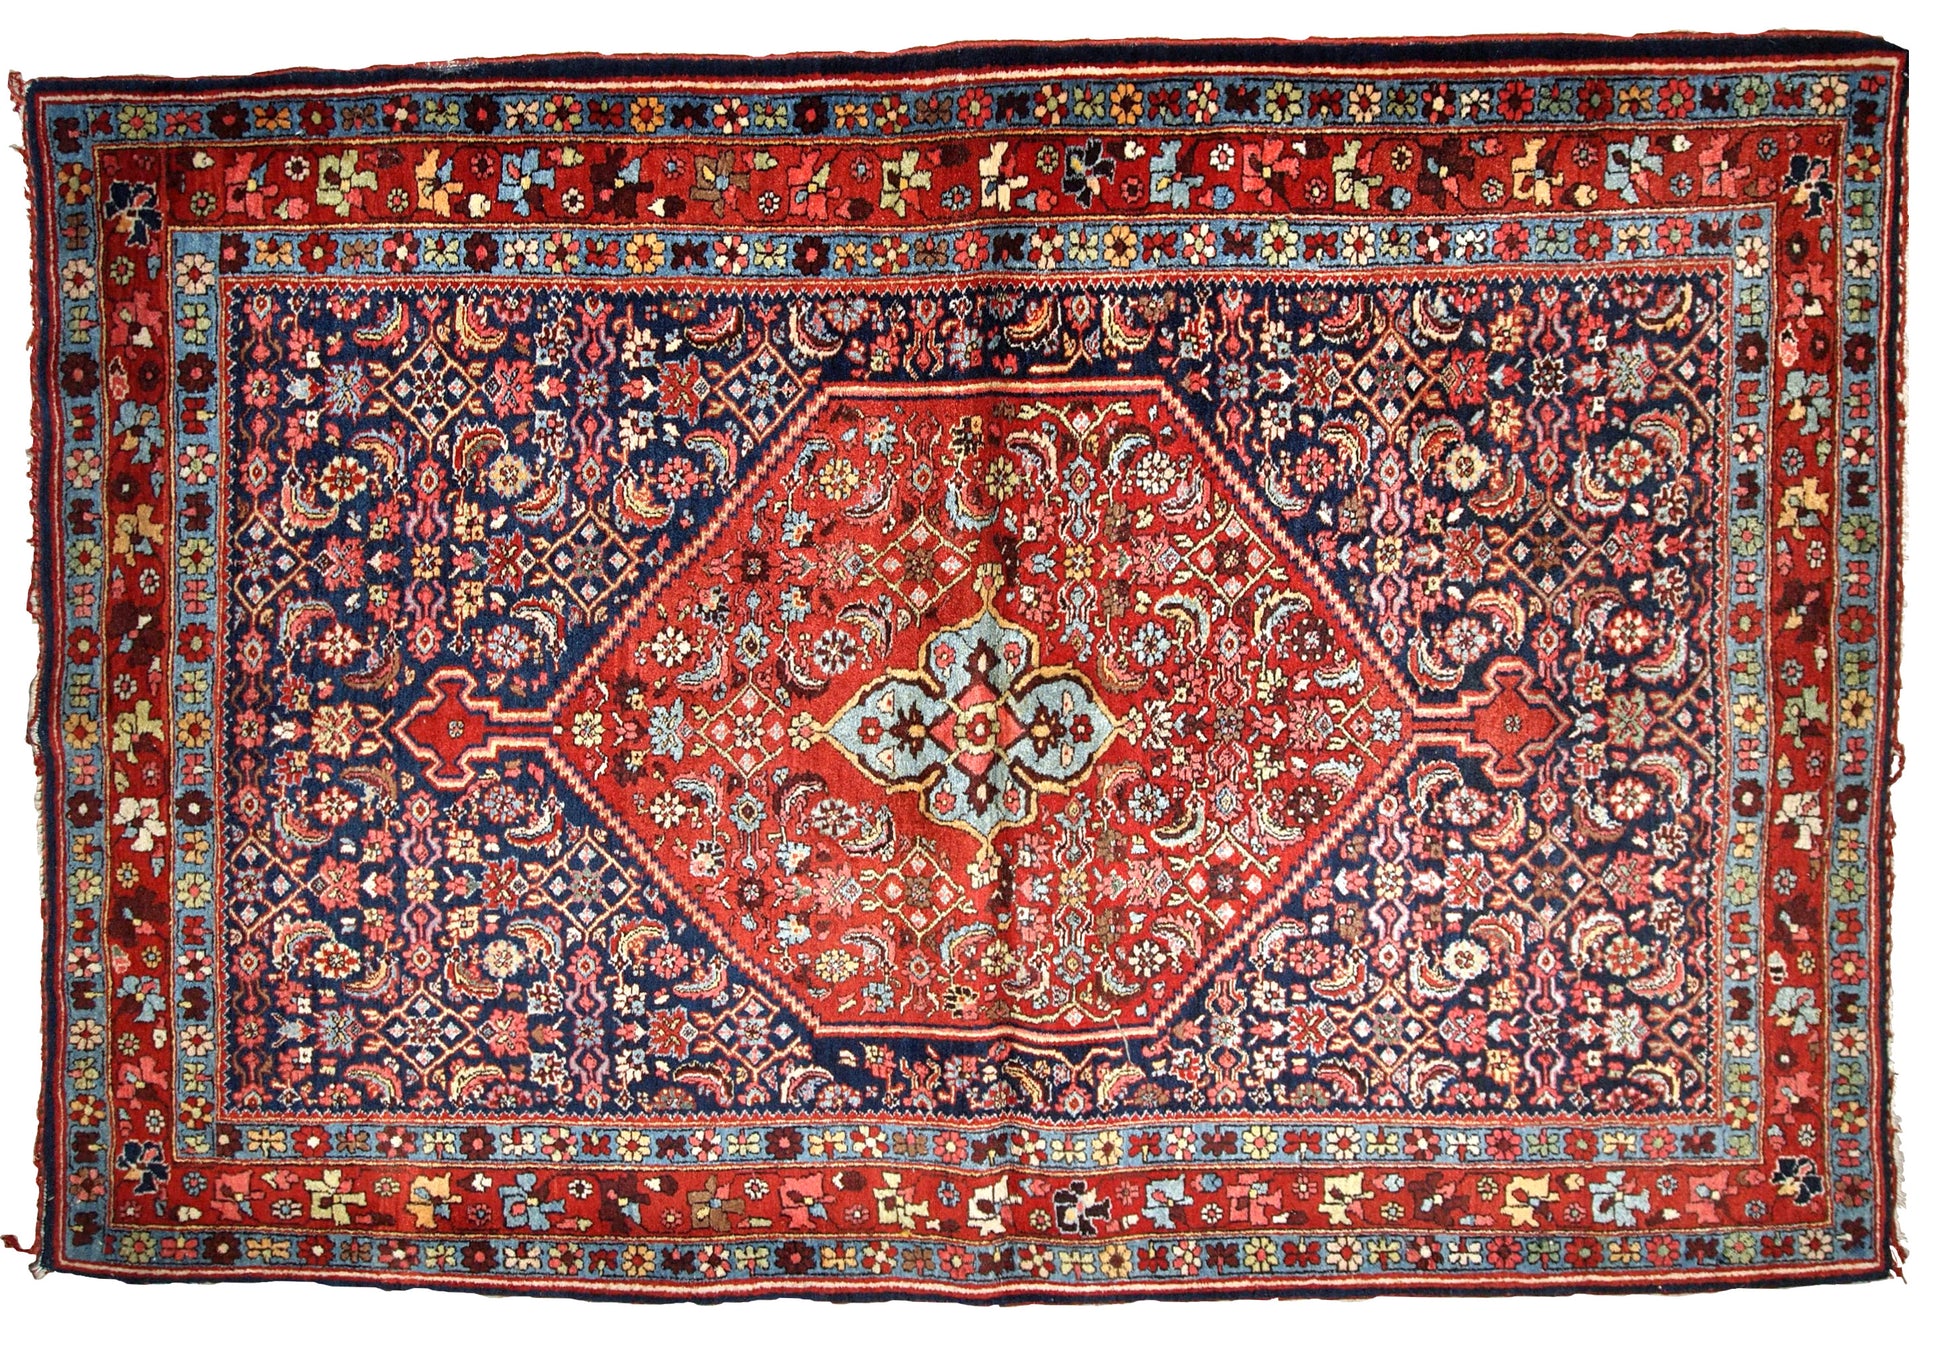 Handmade antique Bidjar rug from the beginning of 20th century. The rug is in original good condition made in red and blue wool.